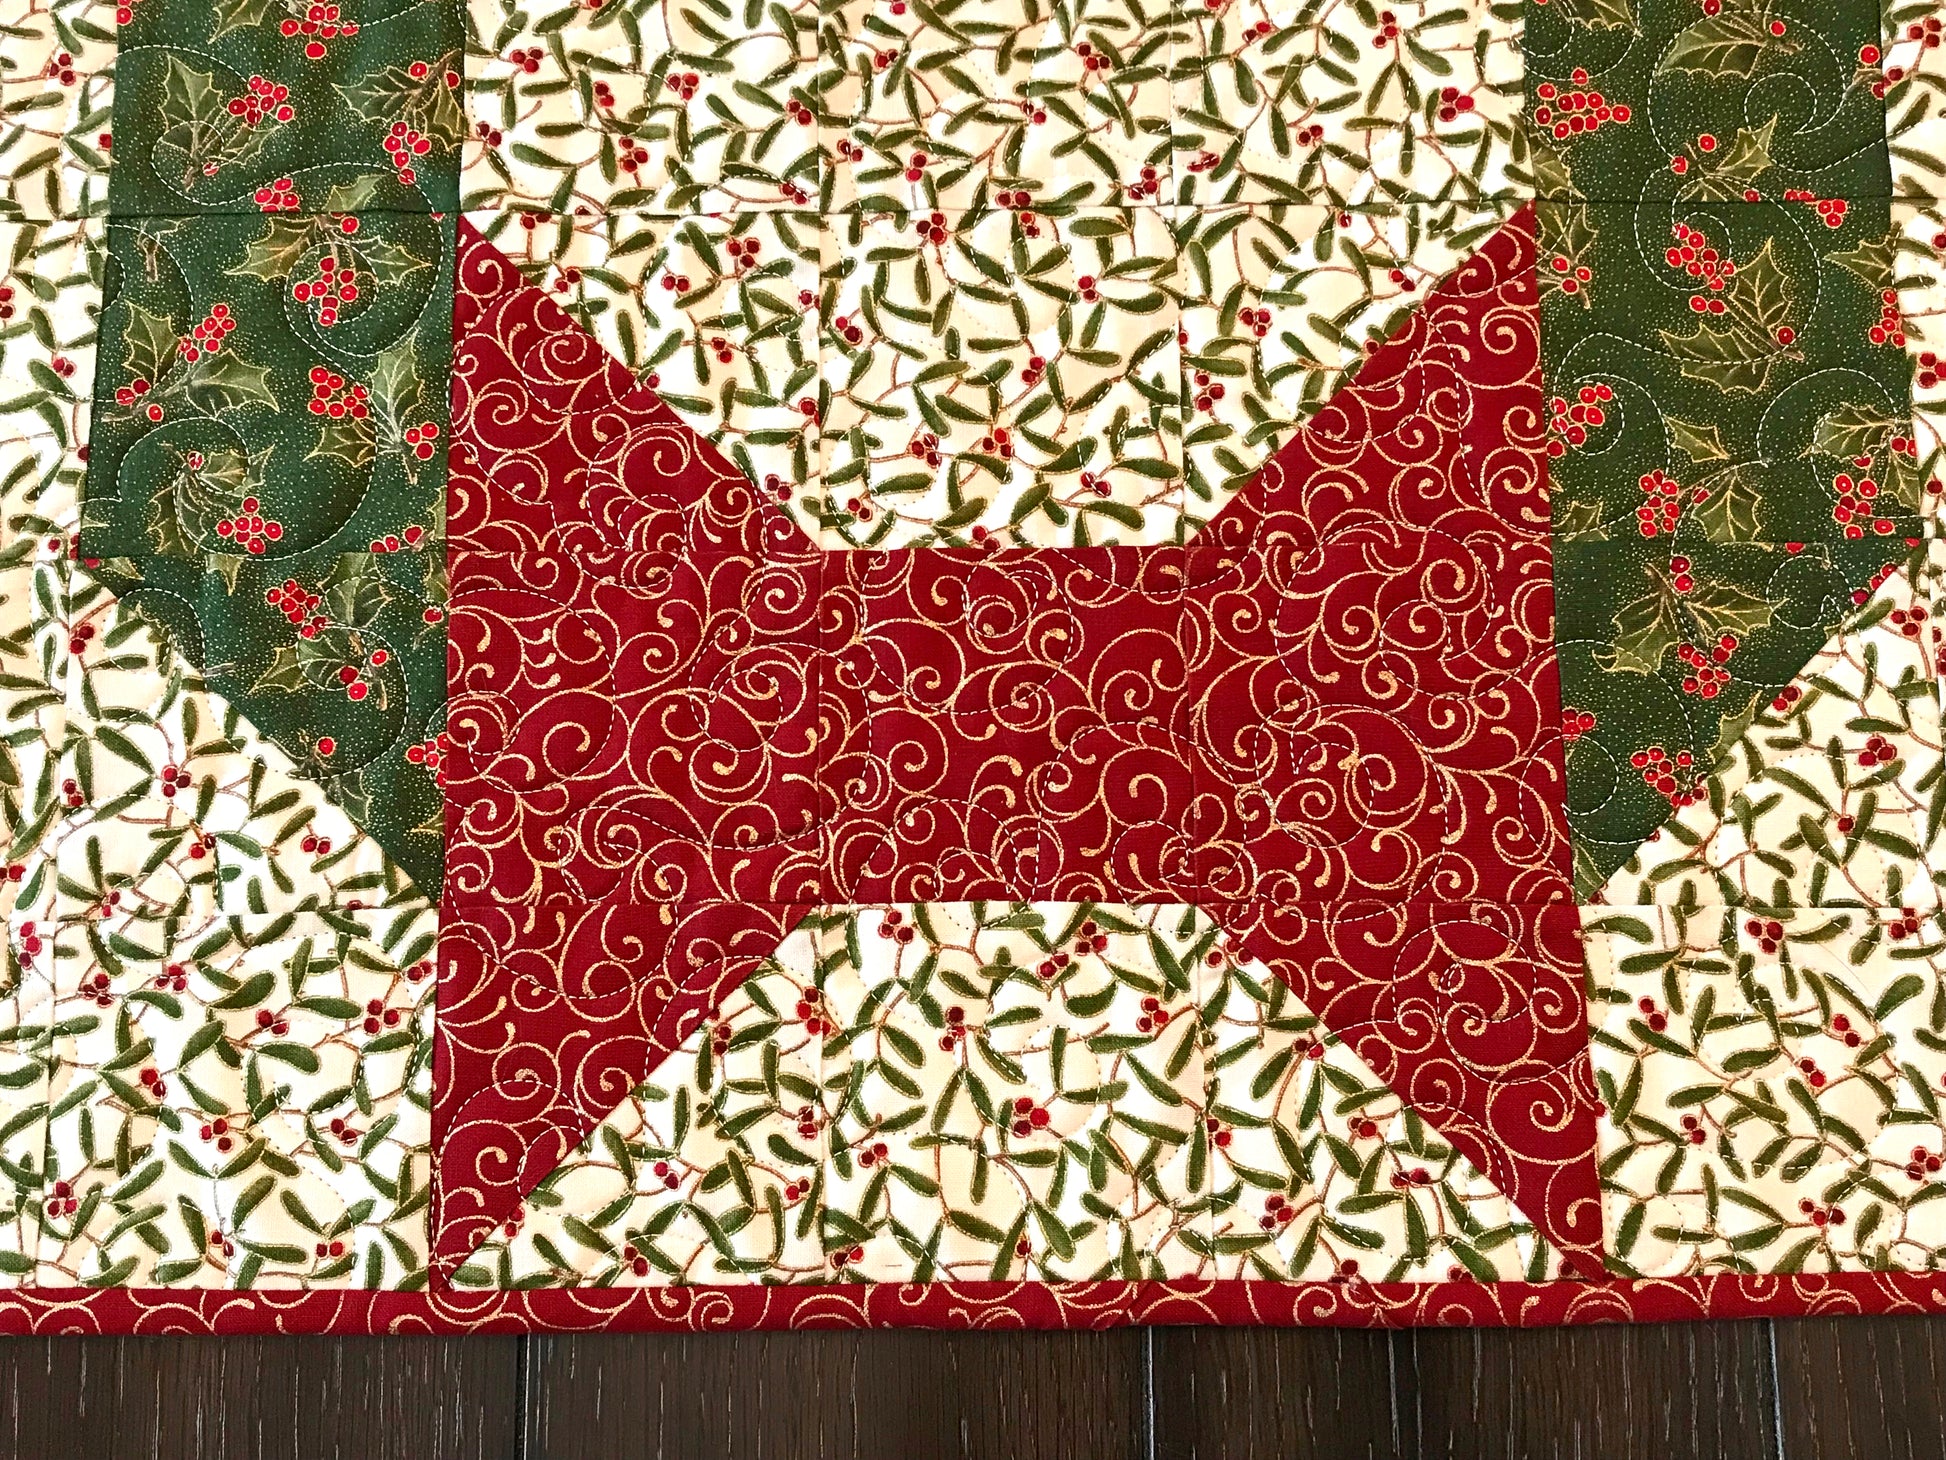 Christmas Wreath Table Topper - Handmade Quilts, Digital Patterns, and Home Décor items online - Cuddle Cat Quiltworks